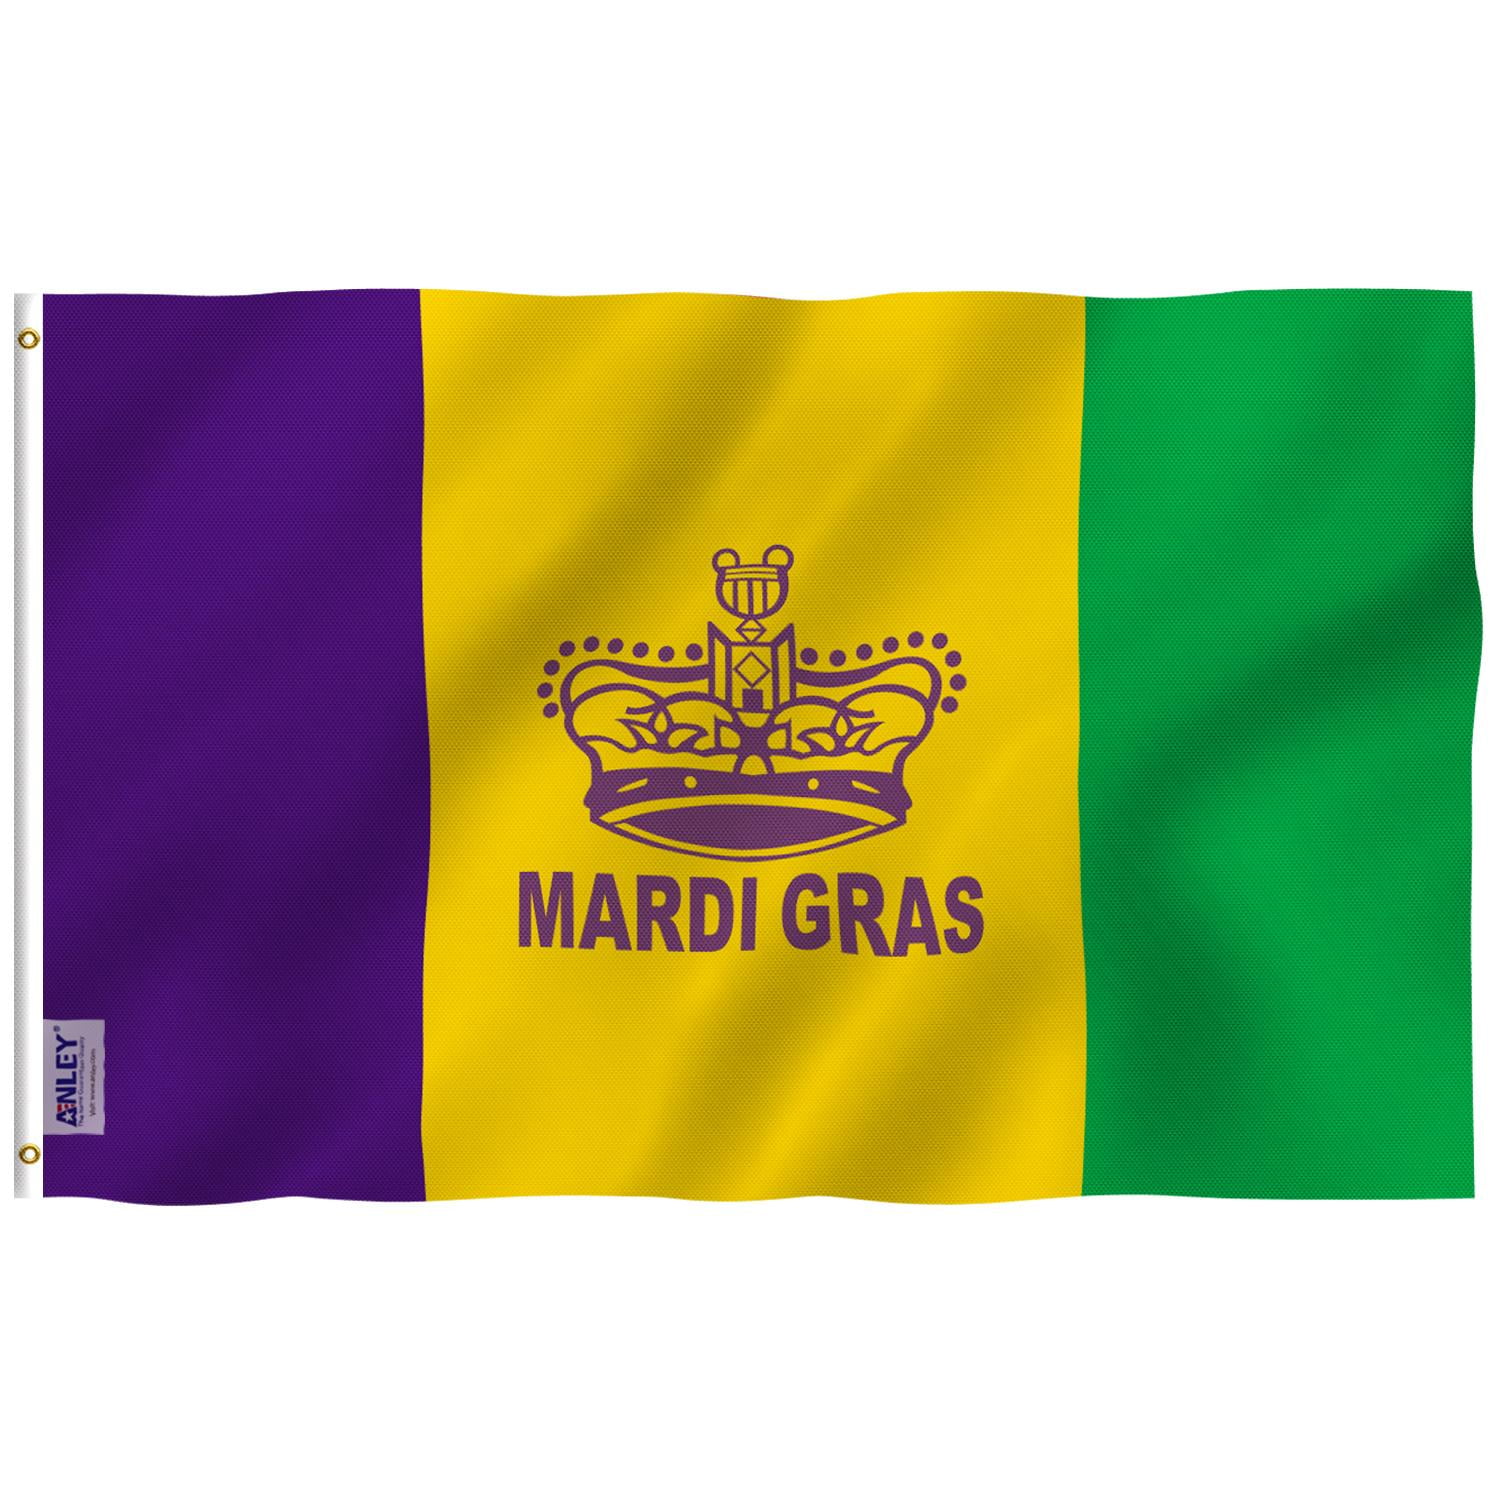 3x5 New Orleans Mardigras Mardi Gras Bunting 3x5 Flag House red white blue fan